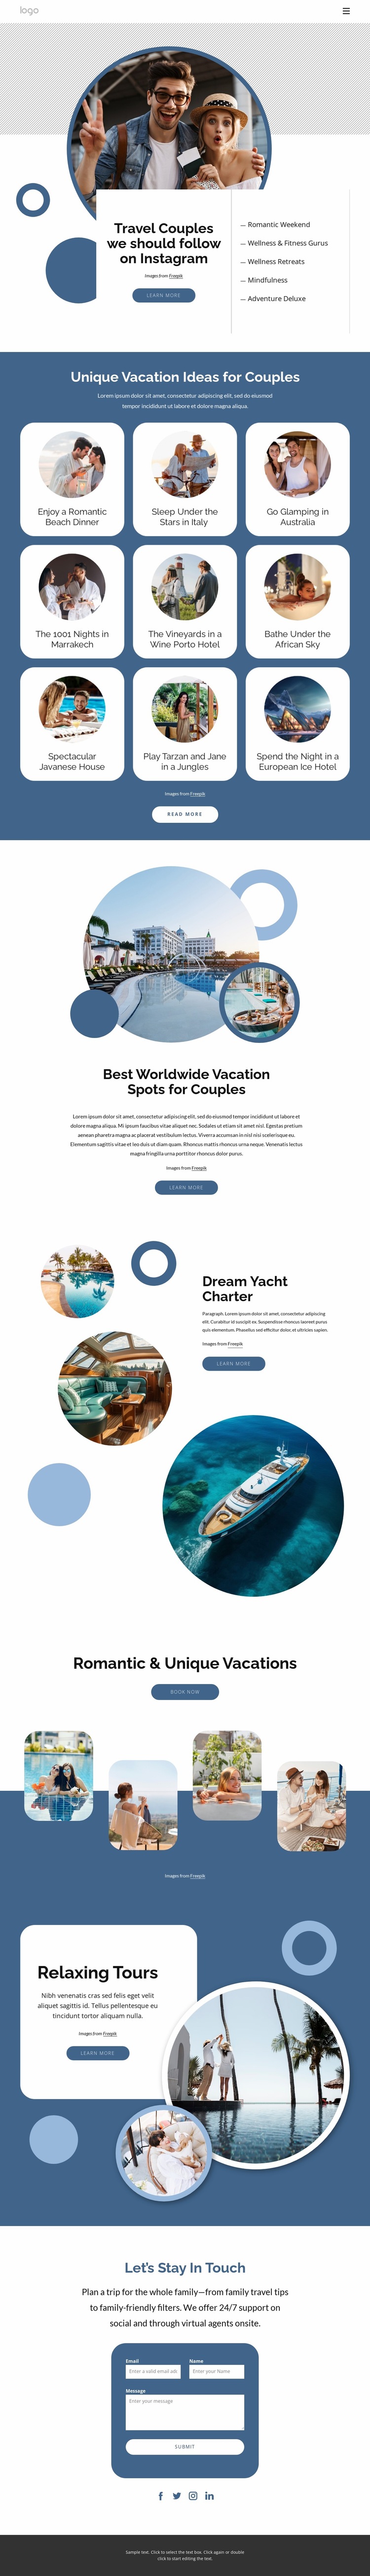 Imagine travelling to some of the most amazing places Website Builder Templates